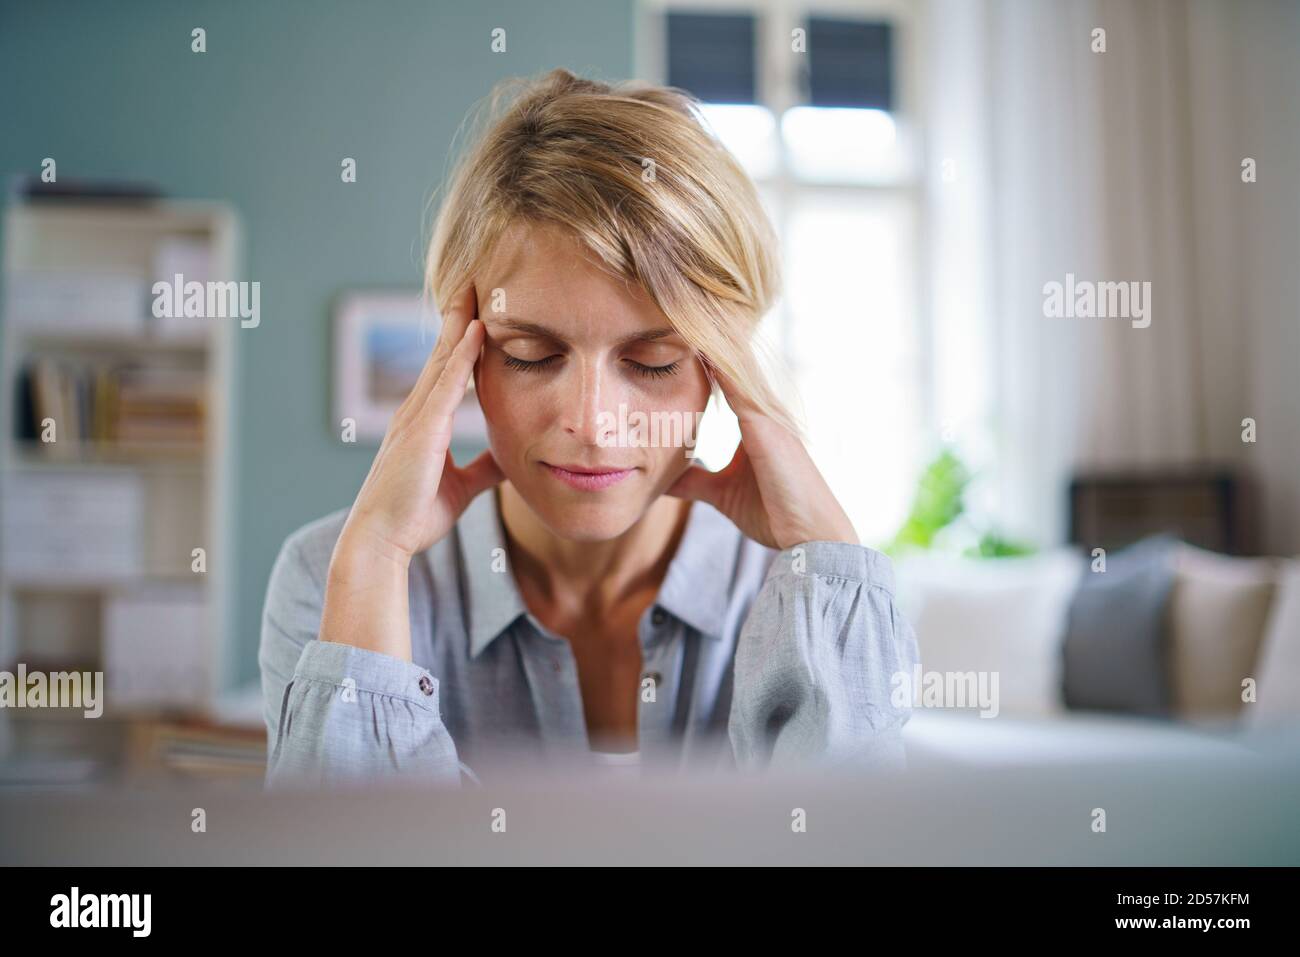 Portrait of business woman meditating indoors in office at desk, mental health concept. Stock Photo